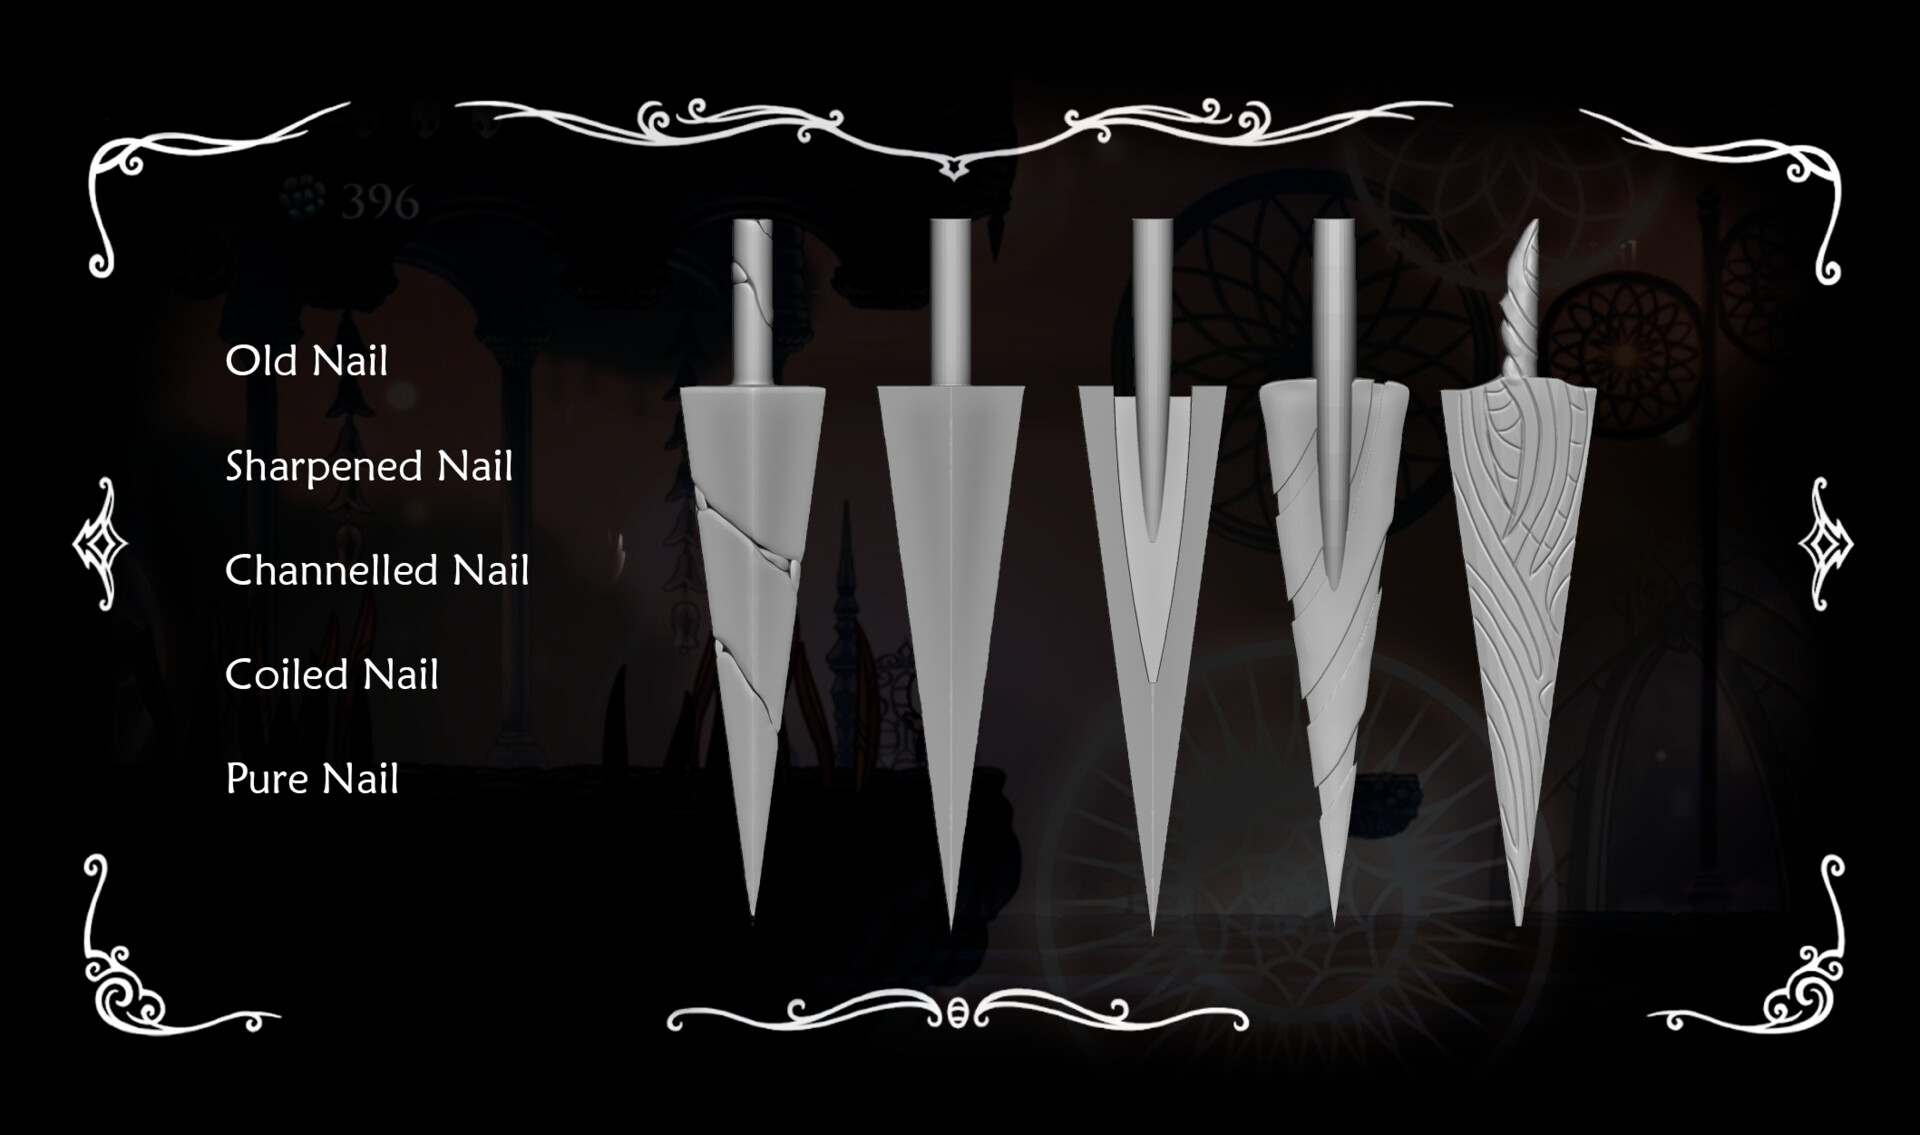 7. Hollow Knight: How to Find and Use All Nail Arts - wide 7